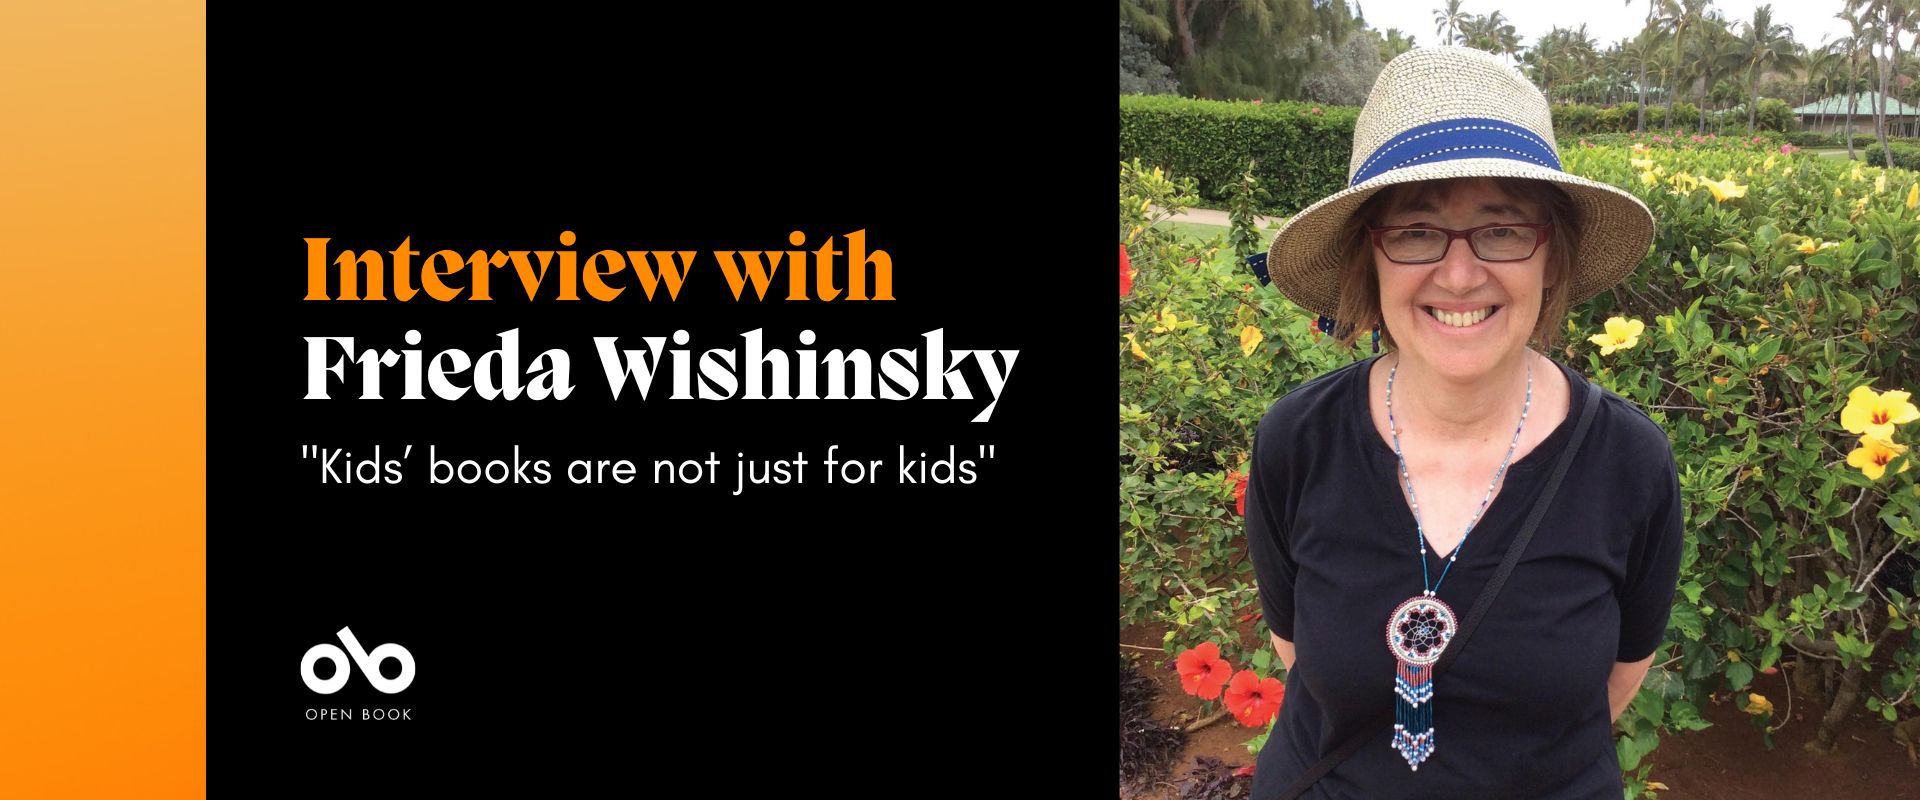 Black and orange banner with a photo of author Frieda Wishinsky and text reading "interview with Frieda Wishinsky" and "Kids' books are not just for kids"